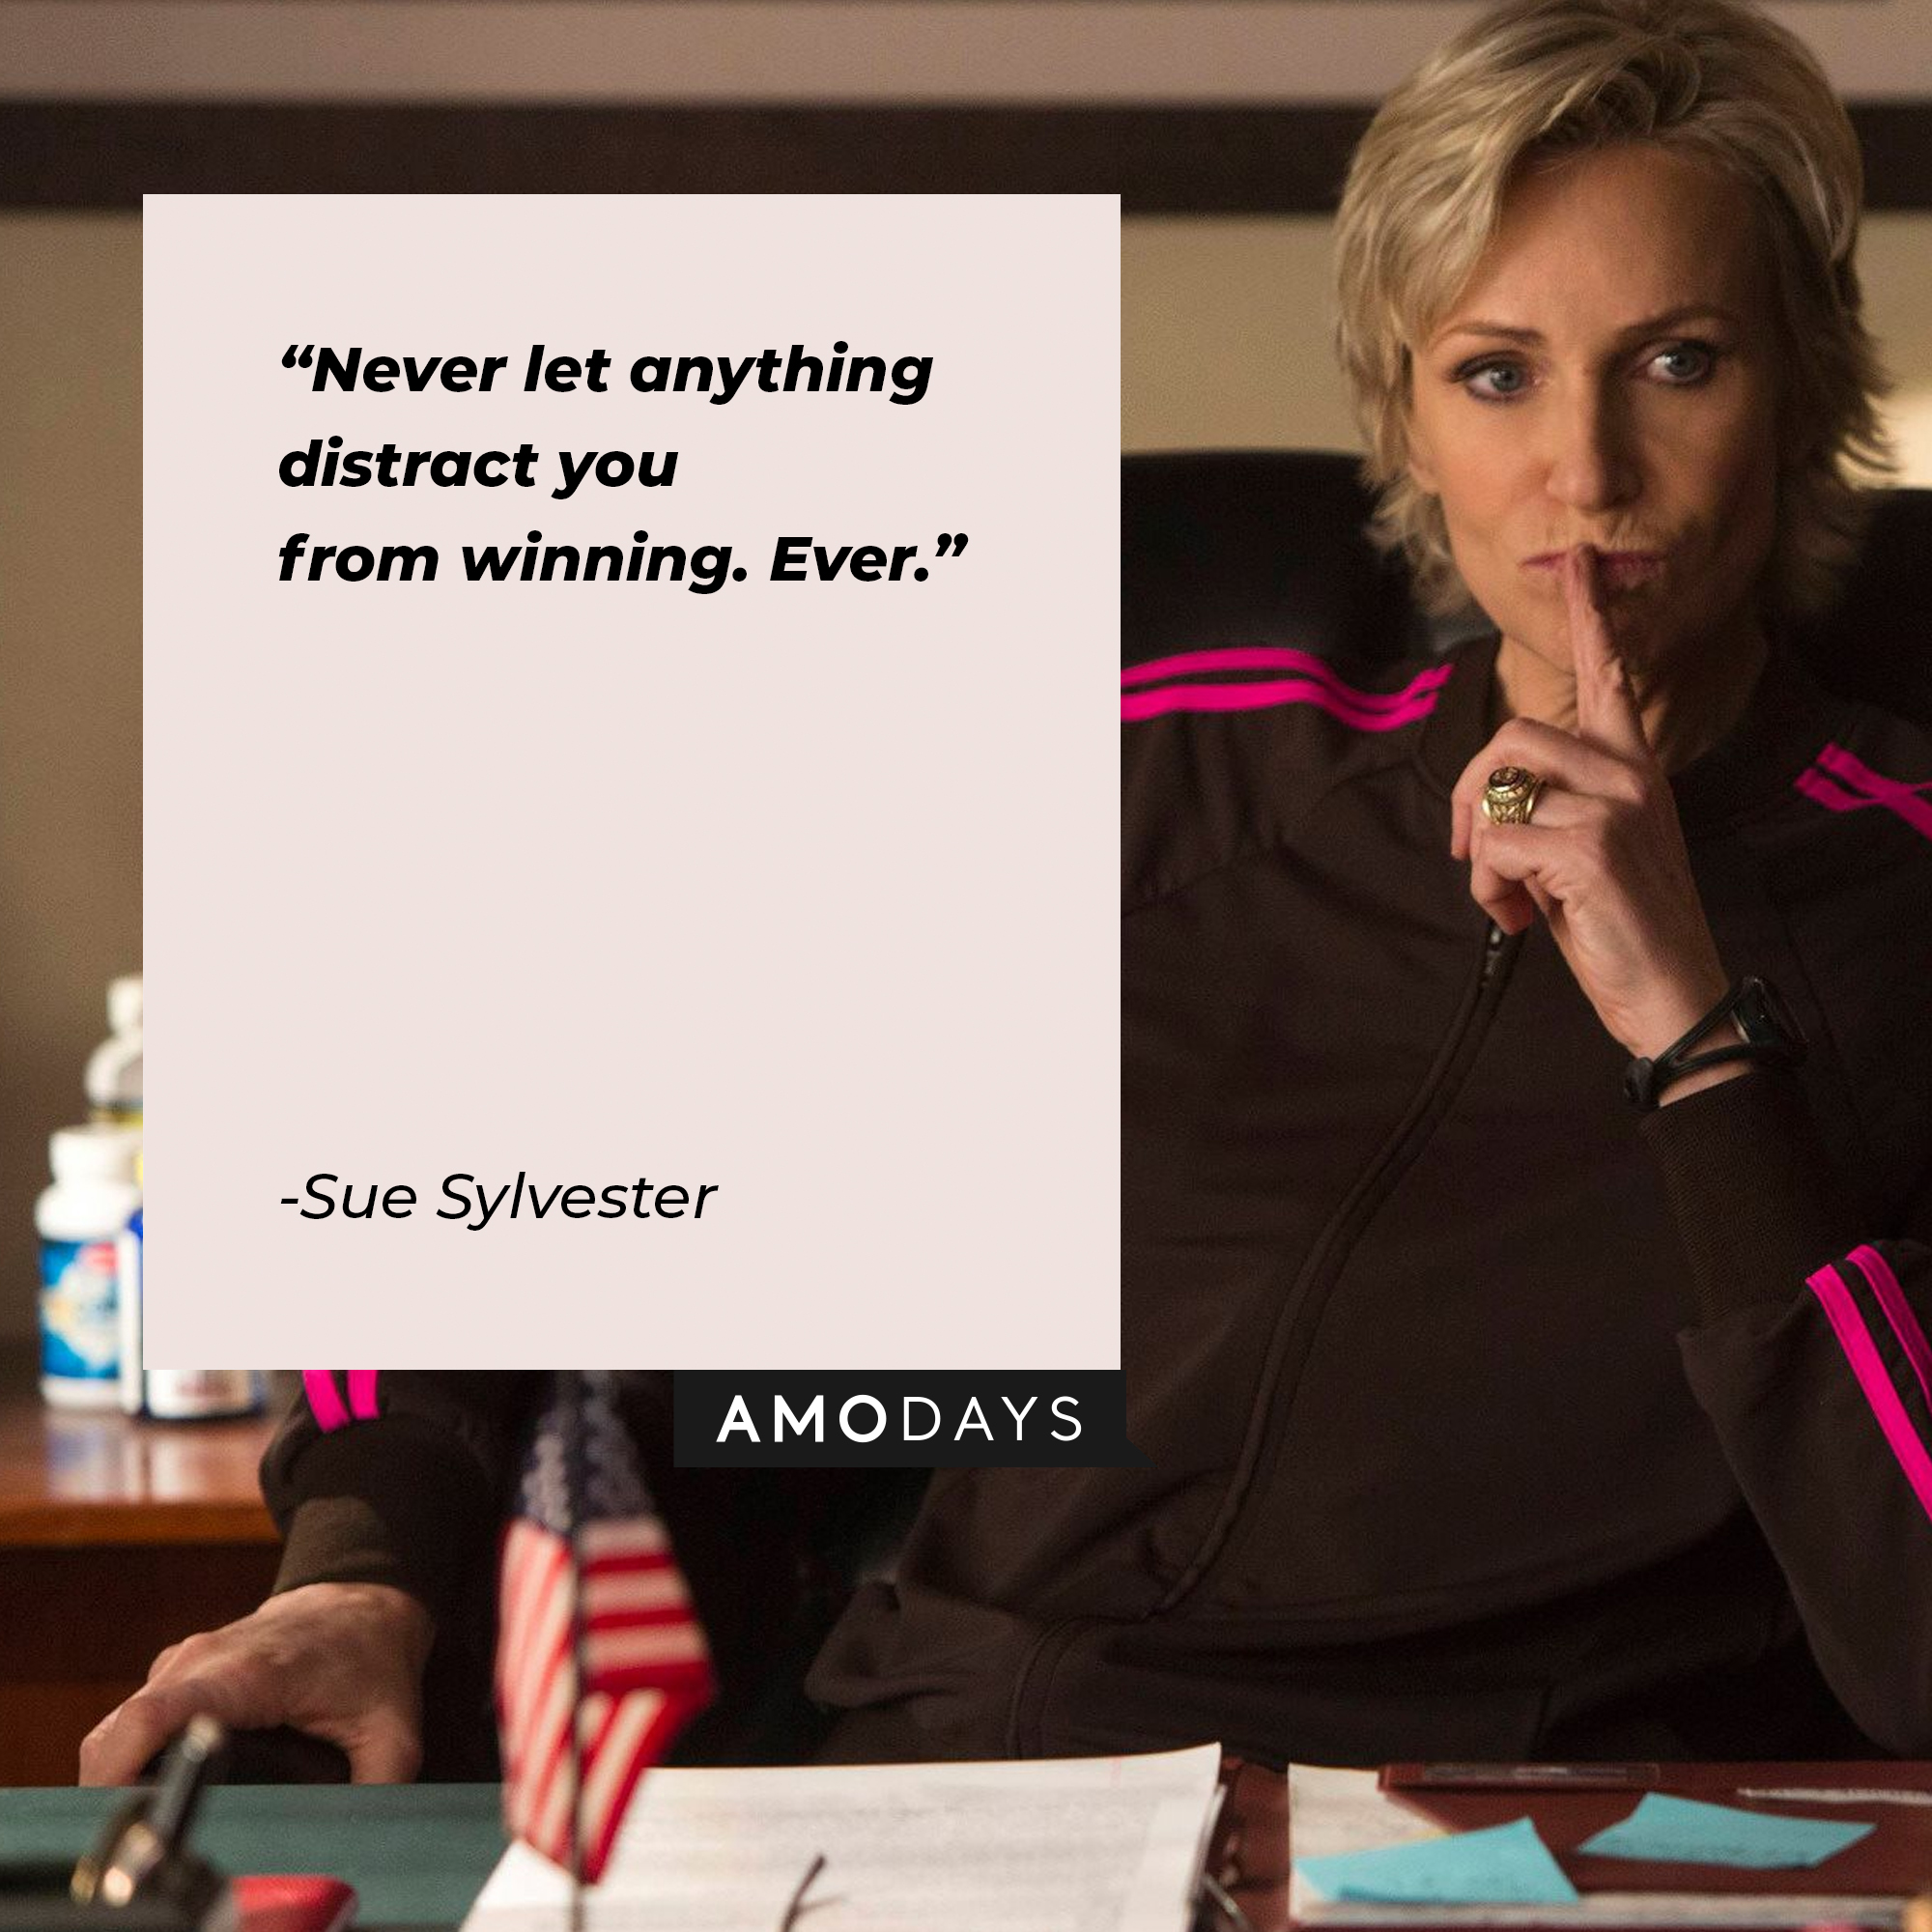 A picture of Sue Sylester with a quote by her : “Never let anything distract you from winning. Ever.” | Source: facebook.com/Glee